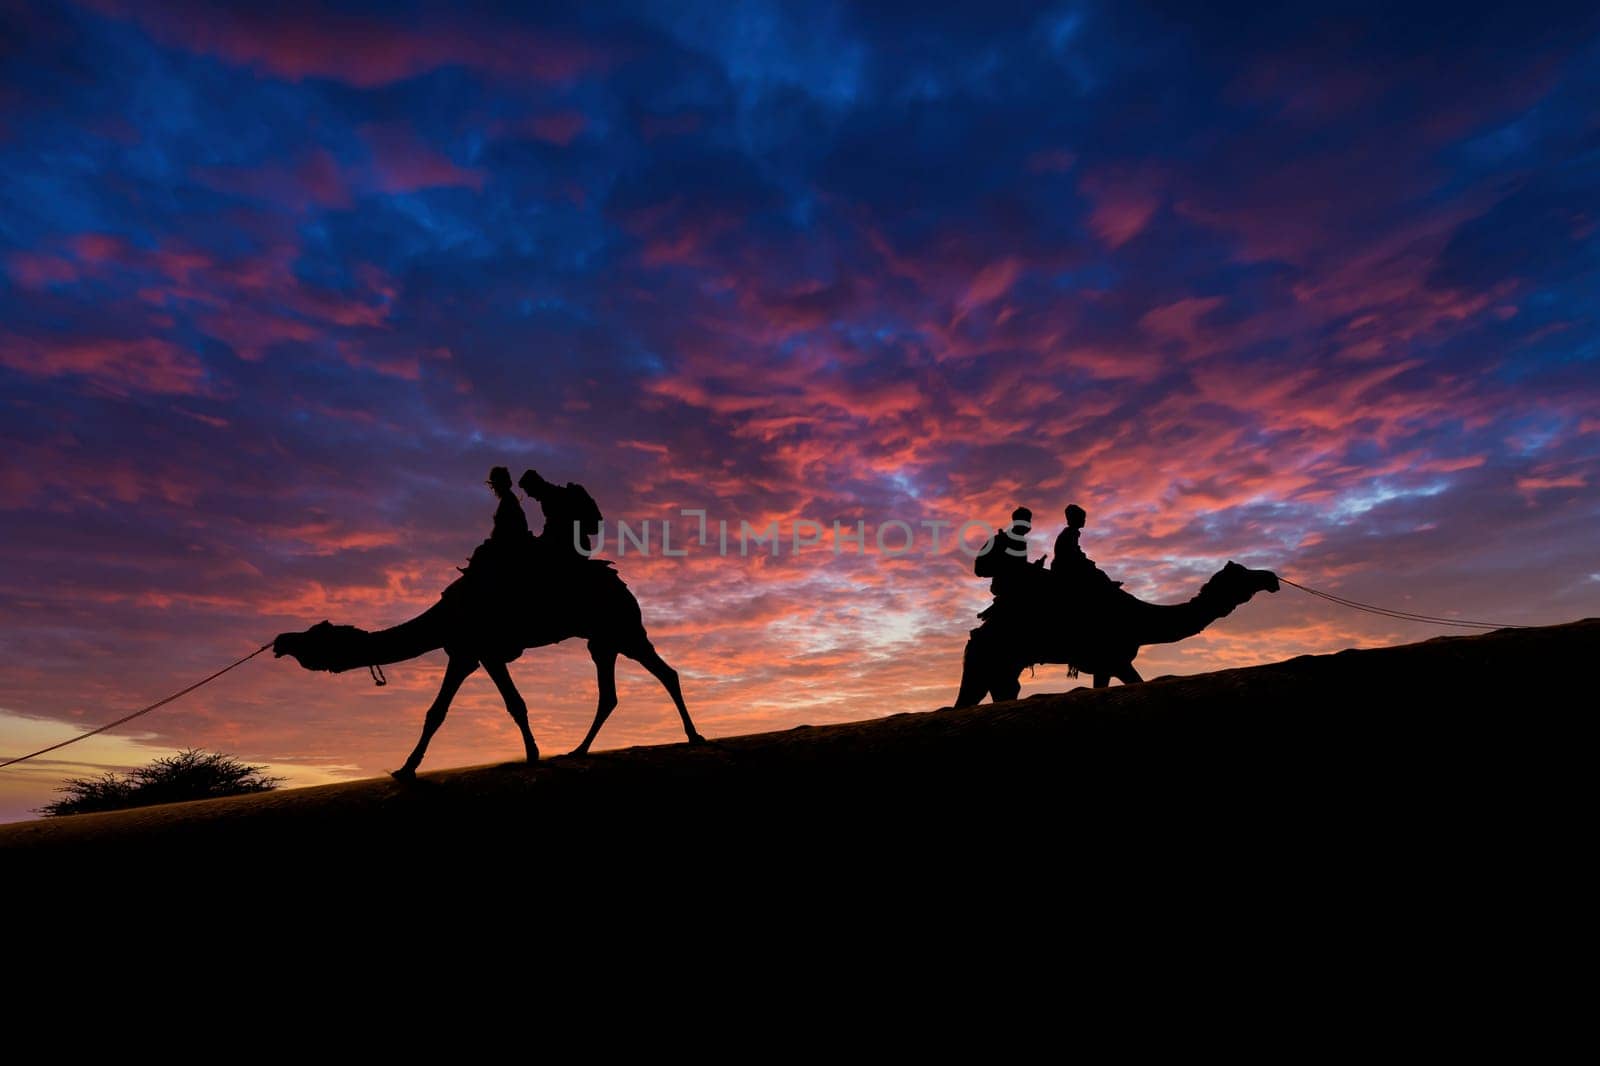 Silhouette of camel with two people sitting on it crossing over sand dunes in Sam Jaisalmer Rajasthan India